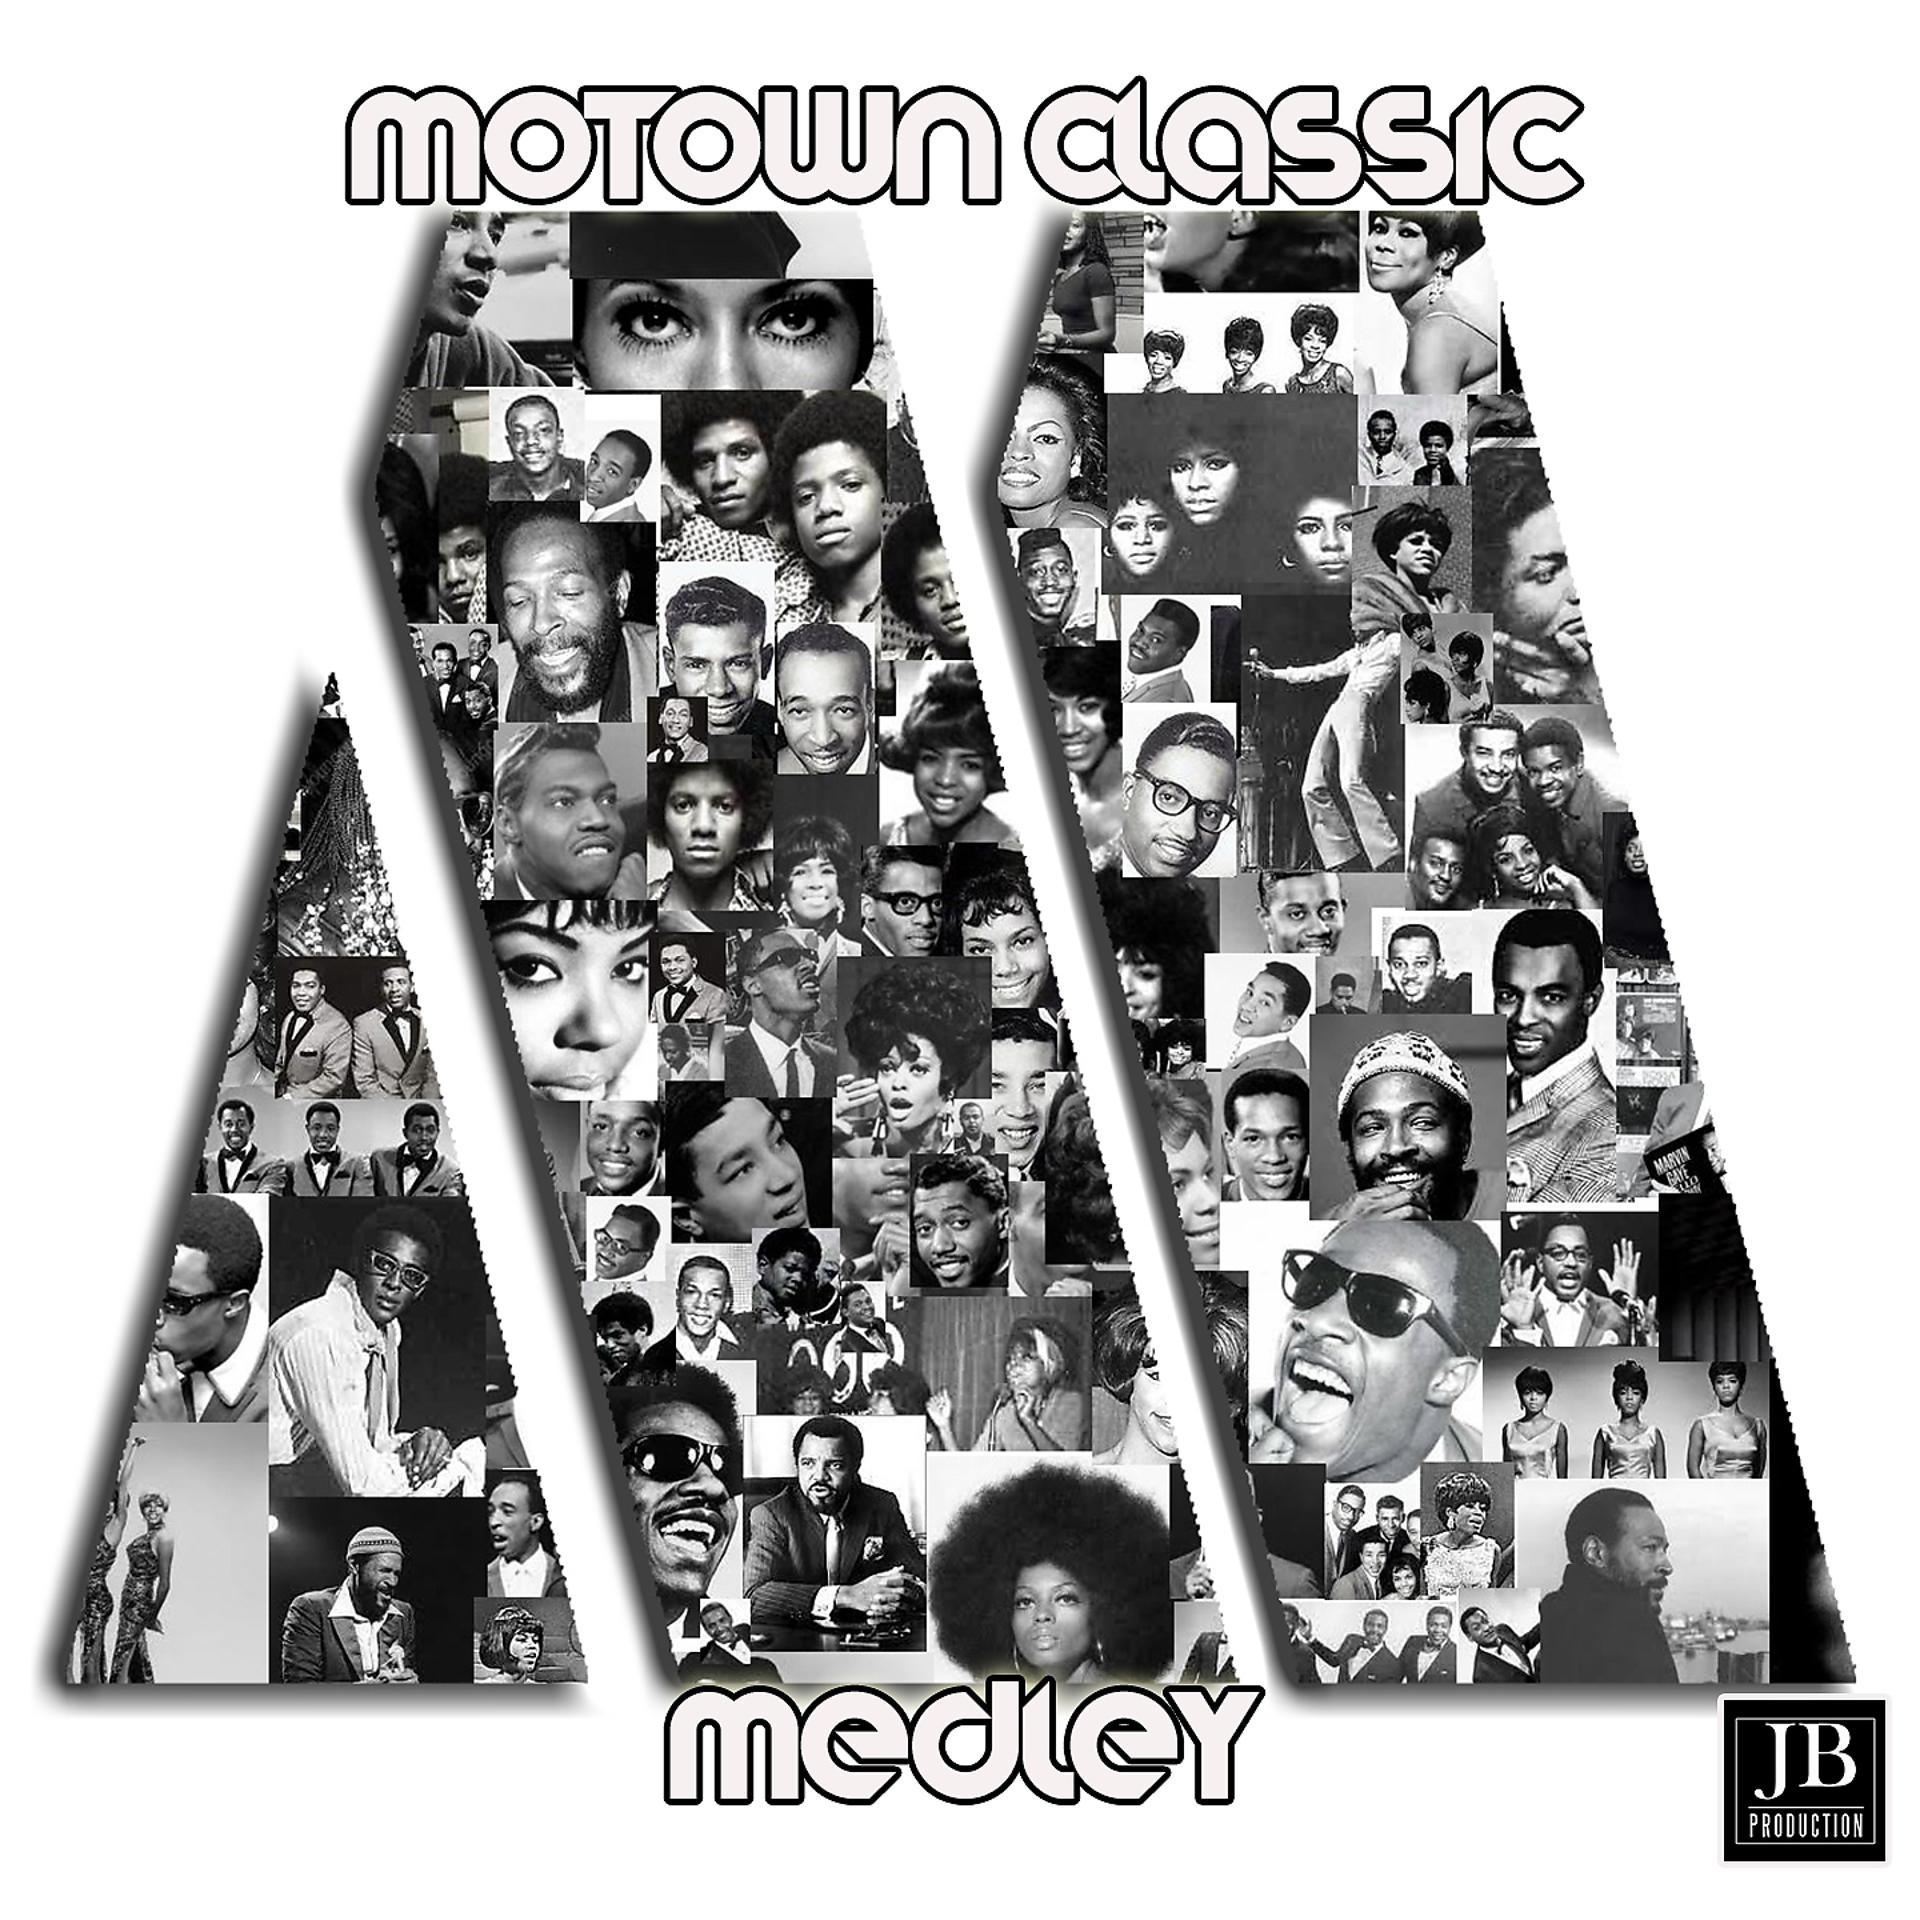 Постер альбома Motown Classics Medley: Stop in the Name of Love / Ain't No Mountain High Enough / I Heard It Through the Grapevine / My Girl / Dancing in the Street / I Can't Help Myself / Ain't Too Proud to Beg / Heatwave / Ooo Baby Baby Dancing Machine / Get Ready / J